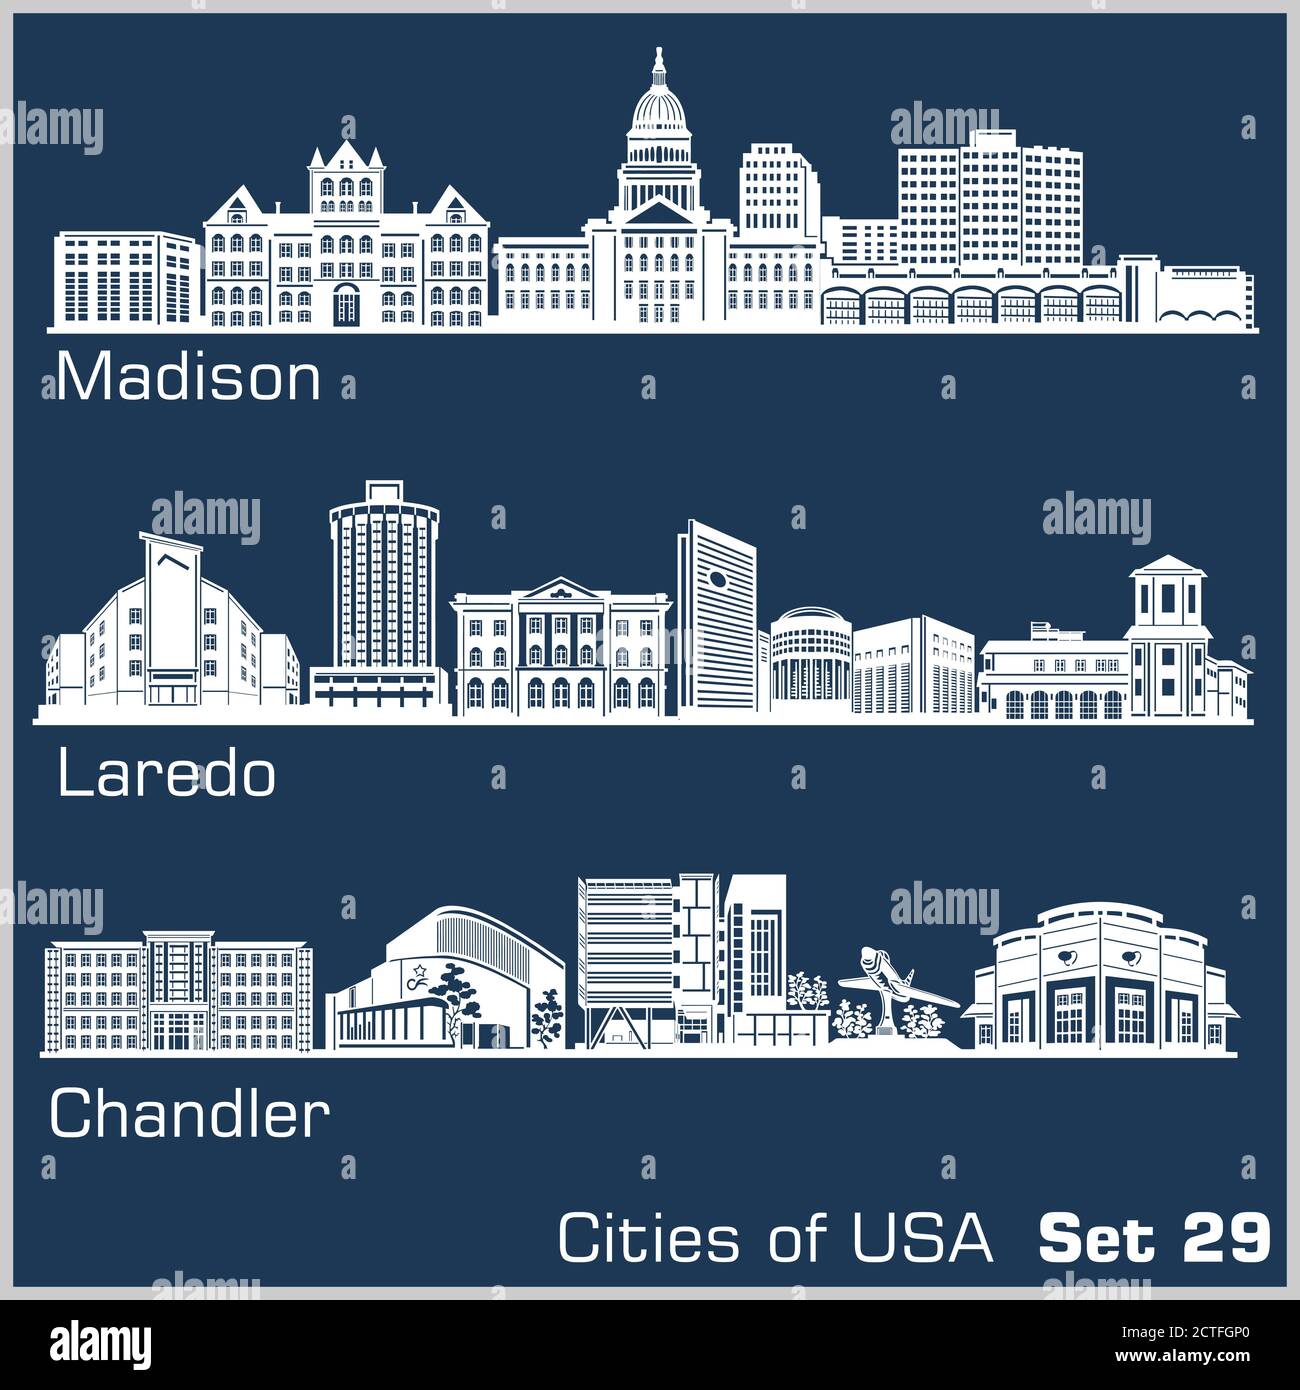 Cities of USA - Madison, Laredo, Chandler. Detailed architecture. Trendy vector illustration. Stock Vector